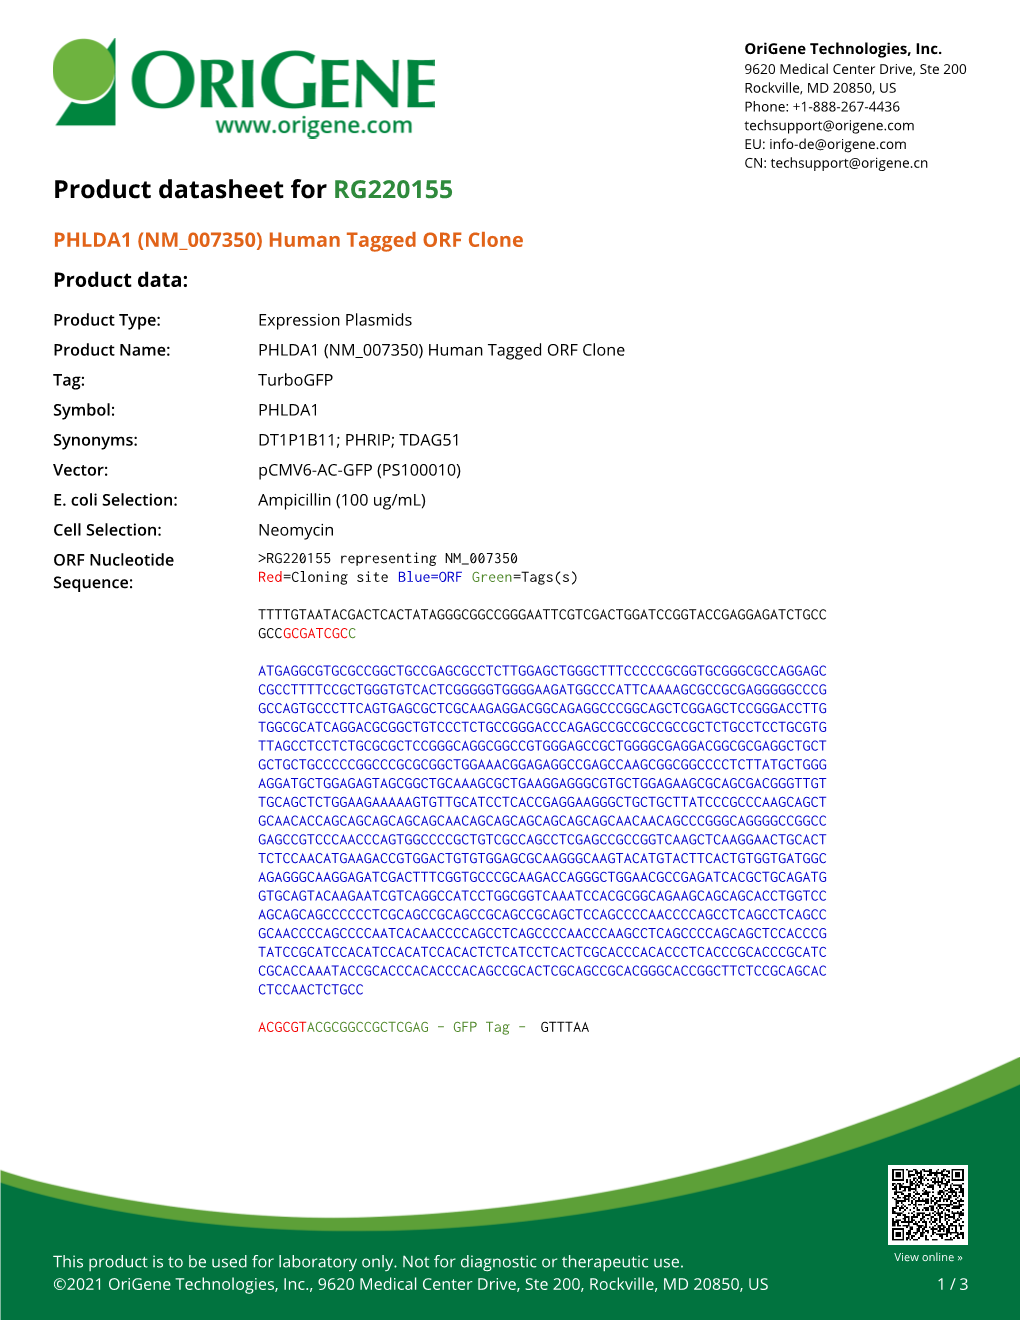 PHLDA1 (NM 007350) Human Tagged ORF Clone Product Data